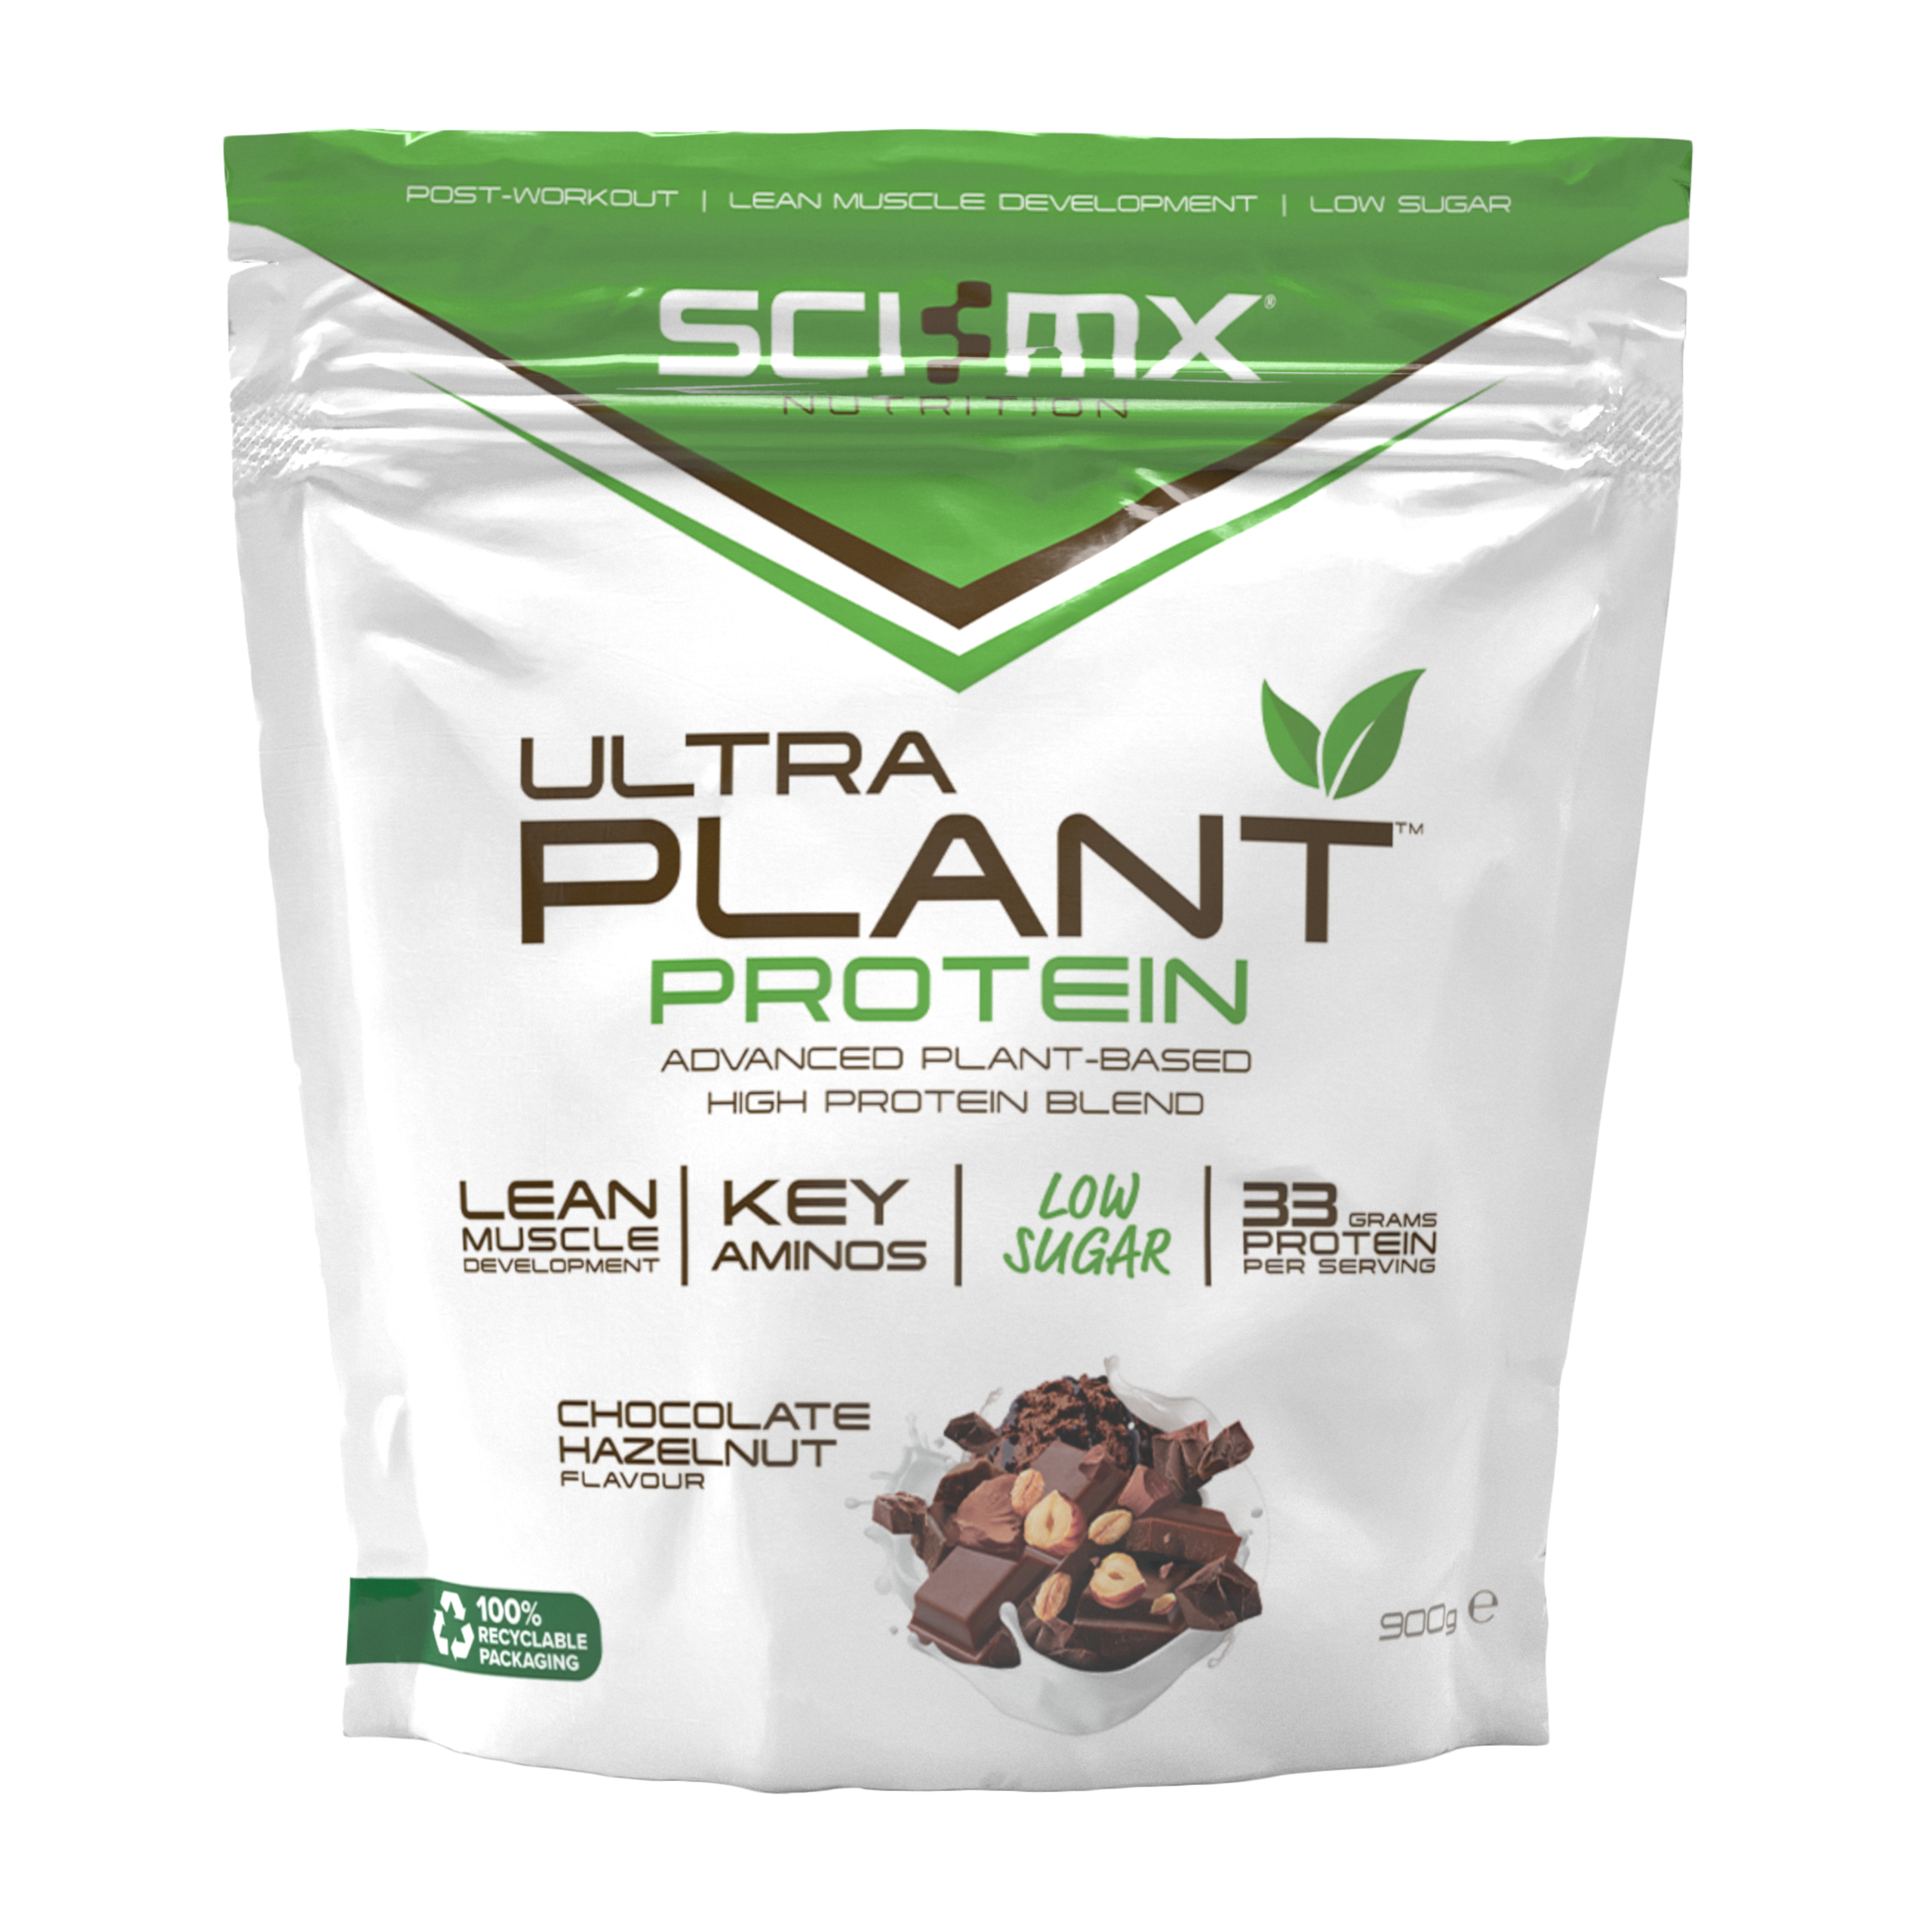 ULTRA PLANT PROTEIN